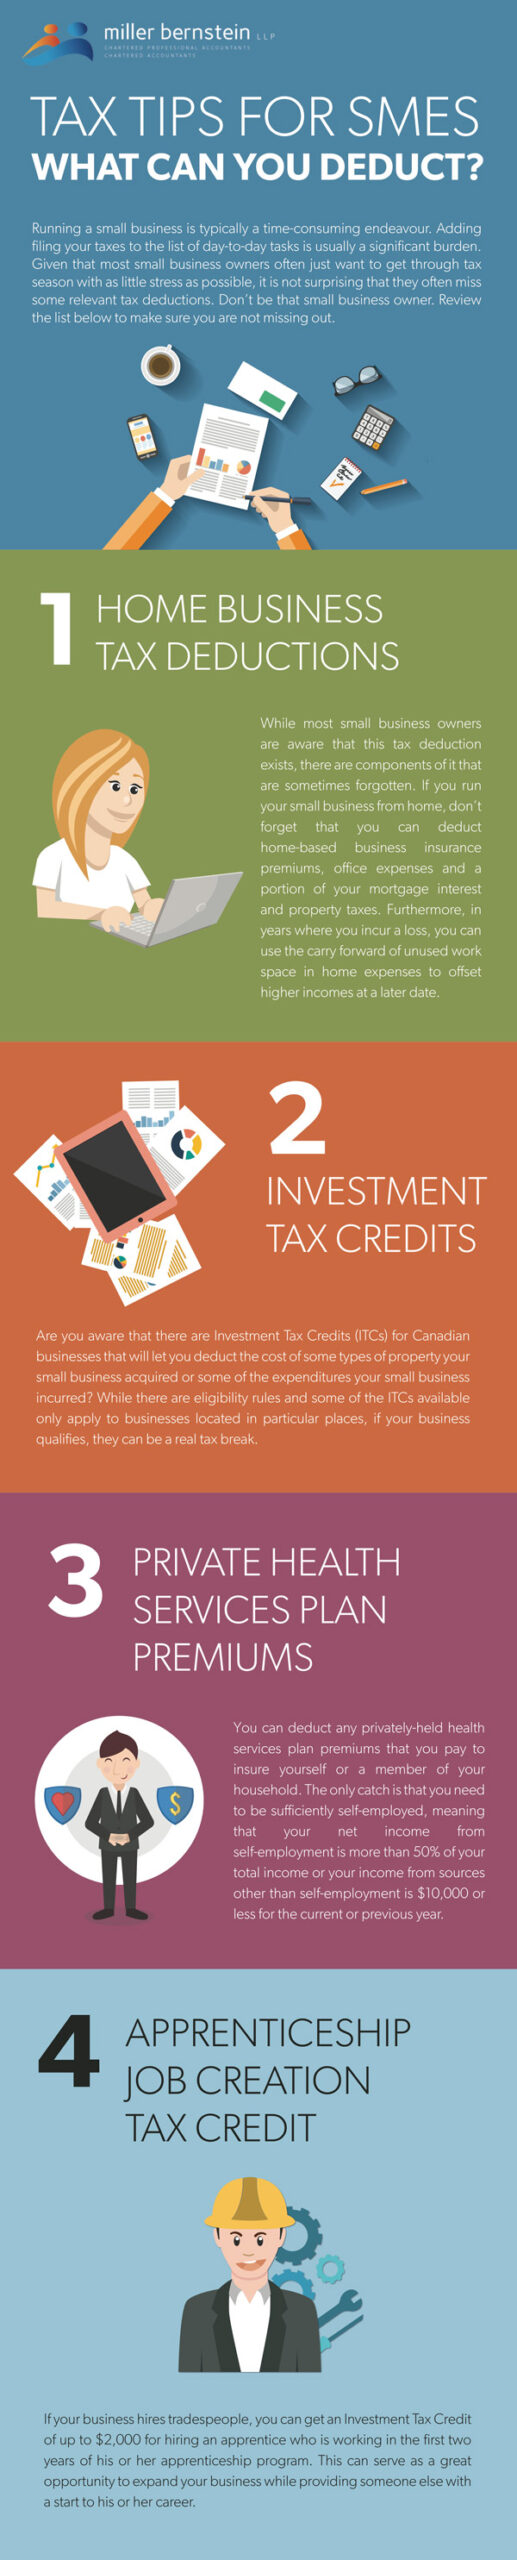 Tax Tips for Canadian SMEs - What Can You Deduct?